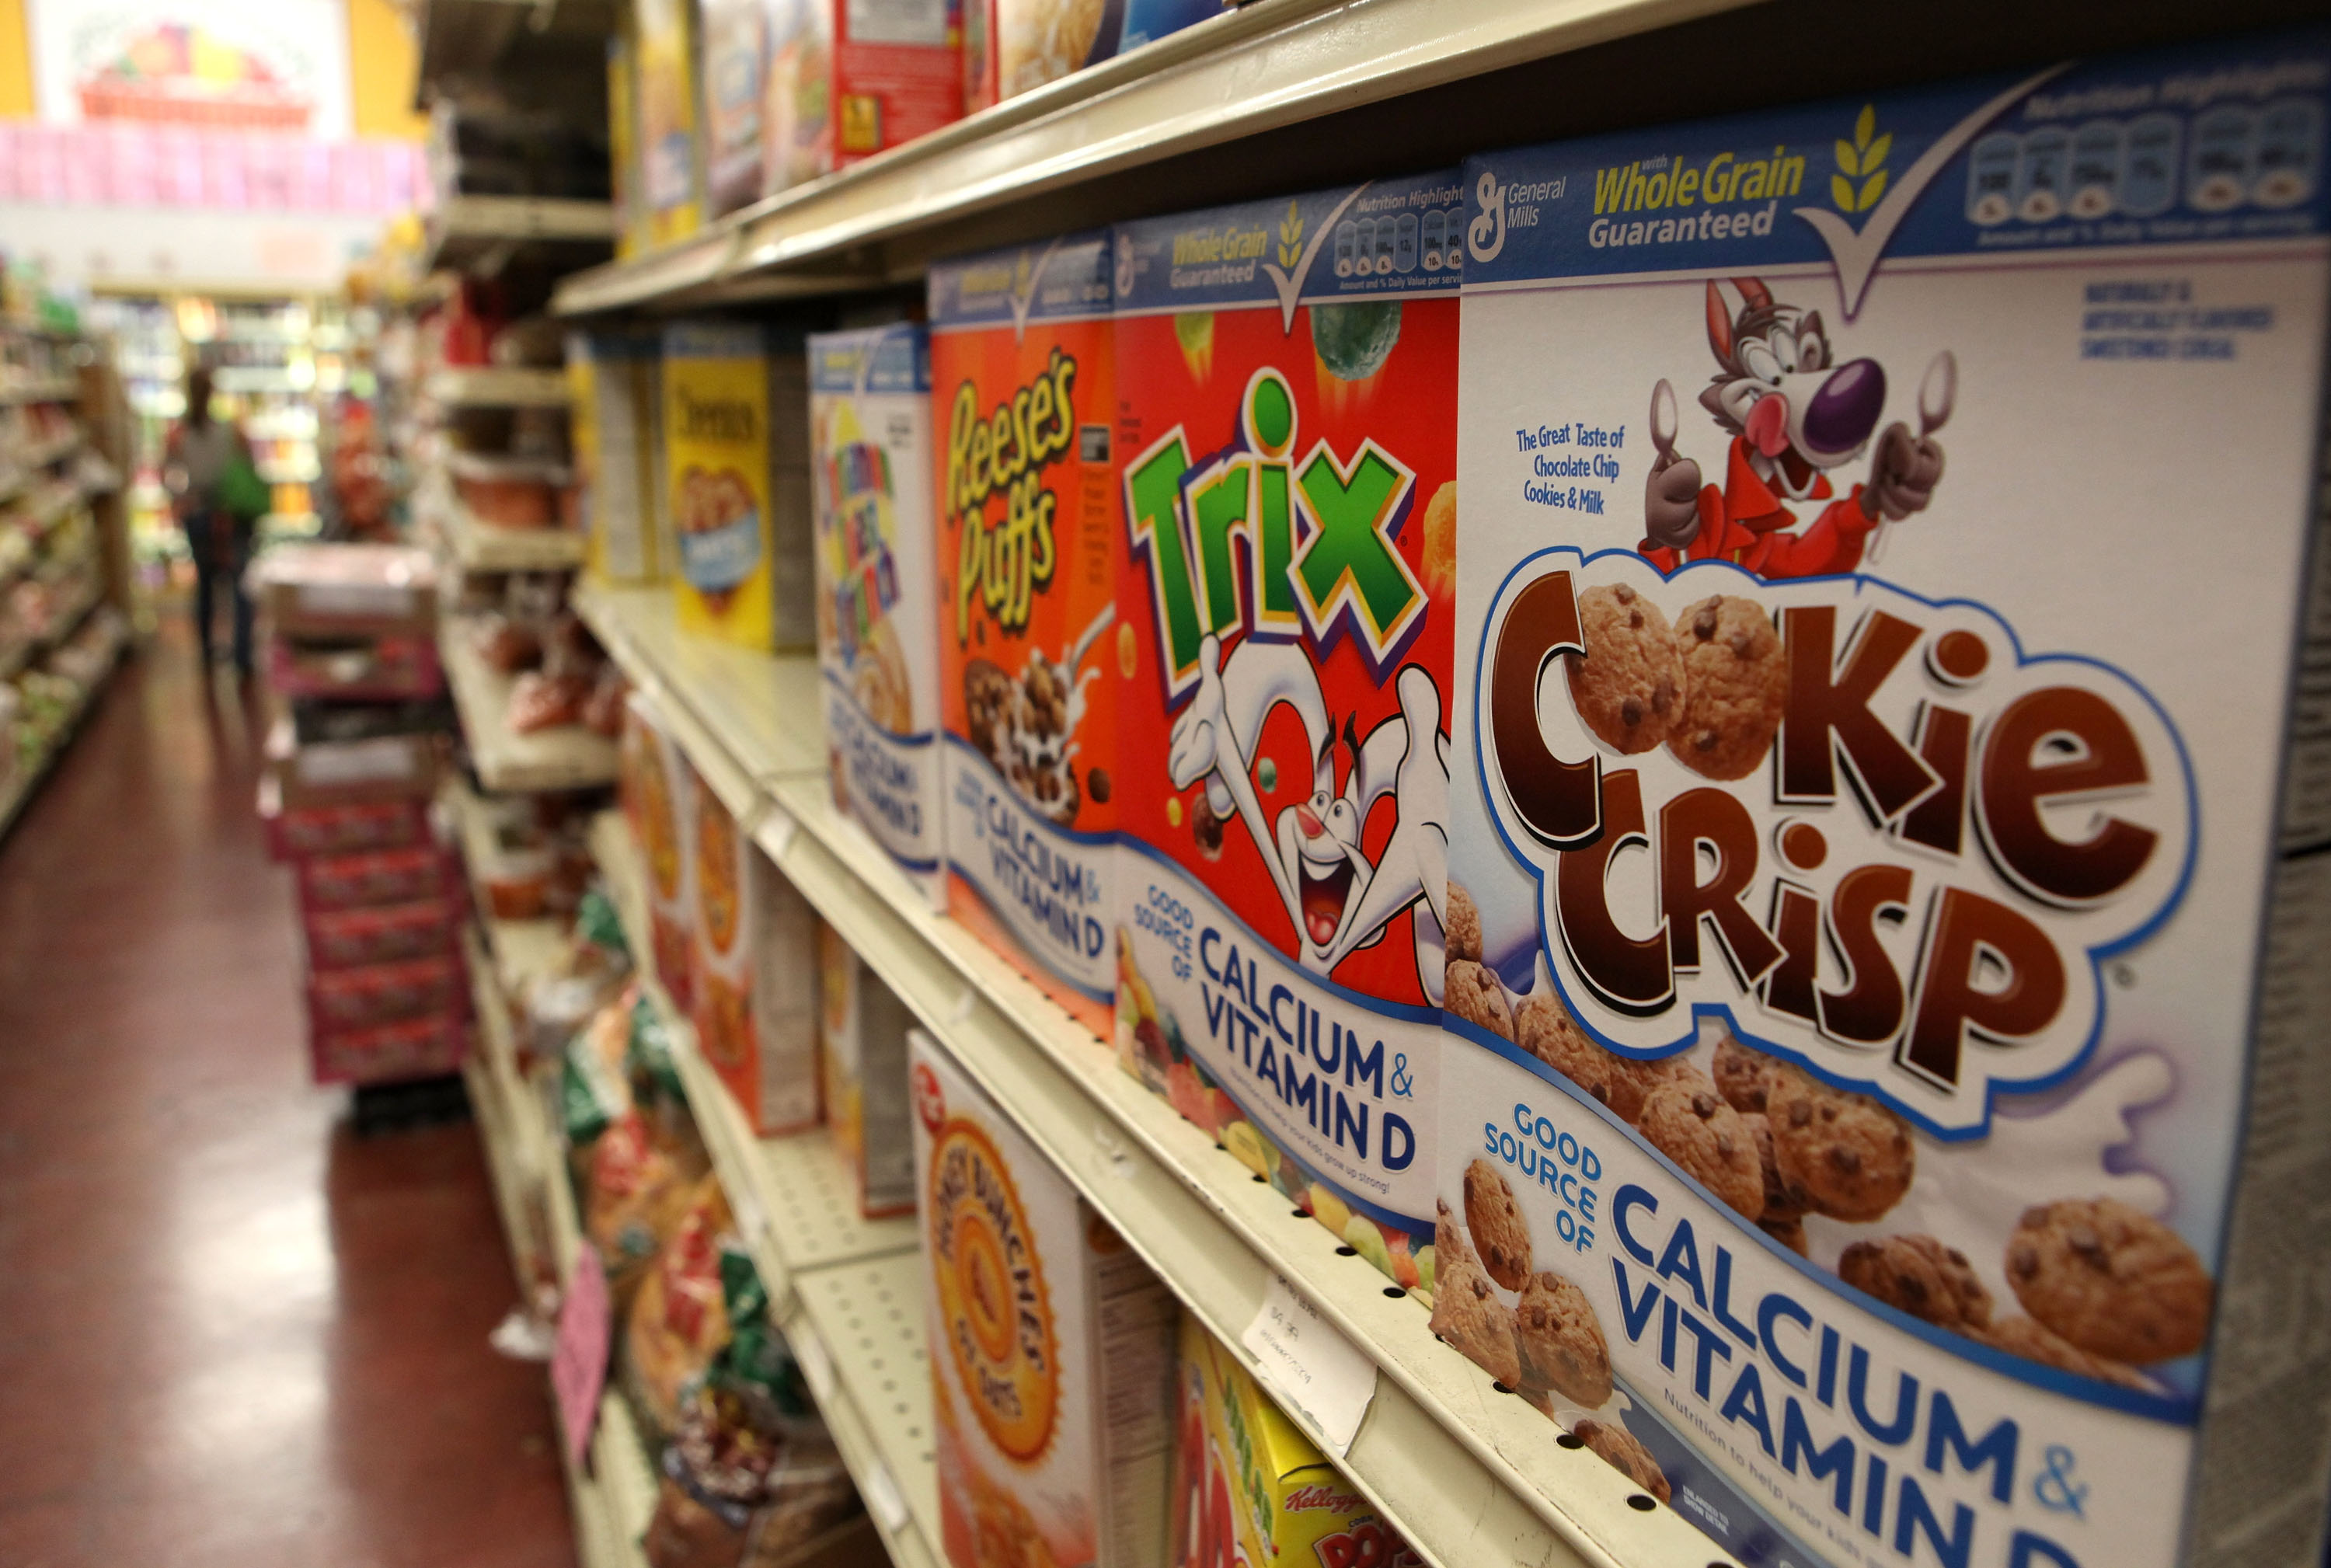 The most- and least-healthy cereals